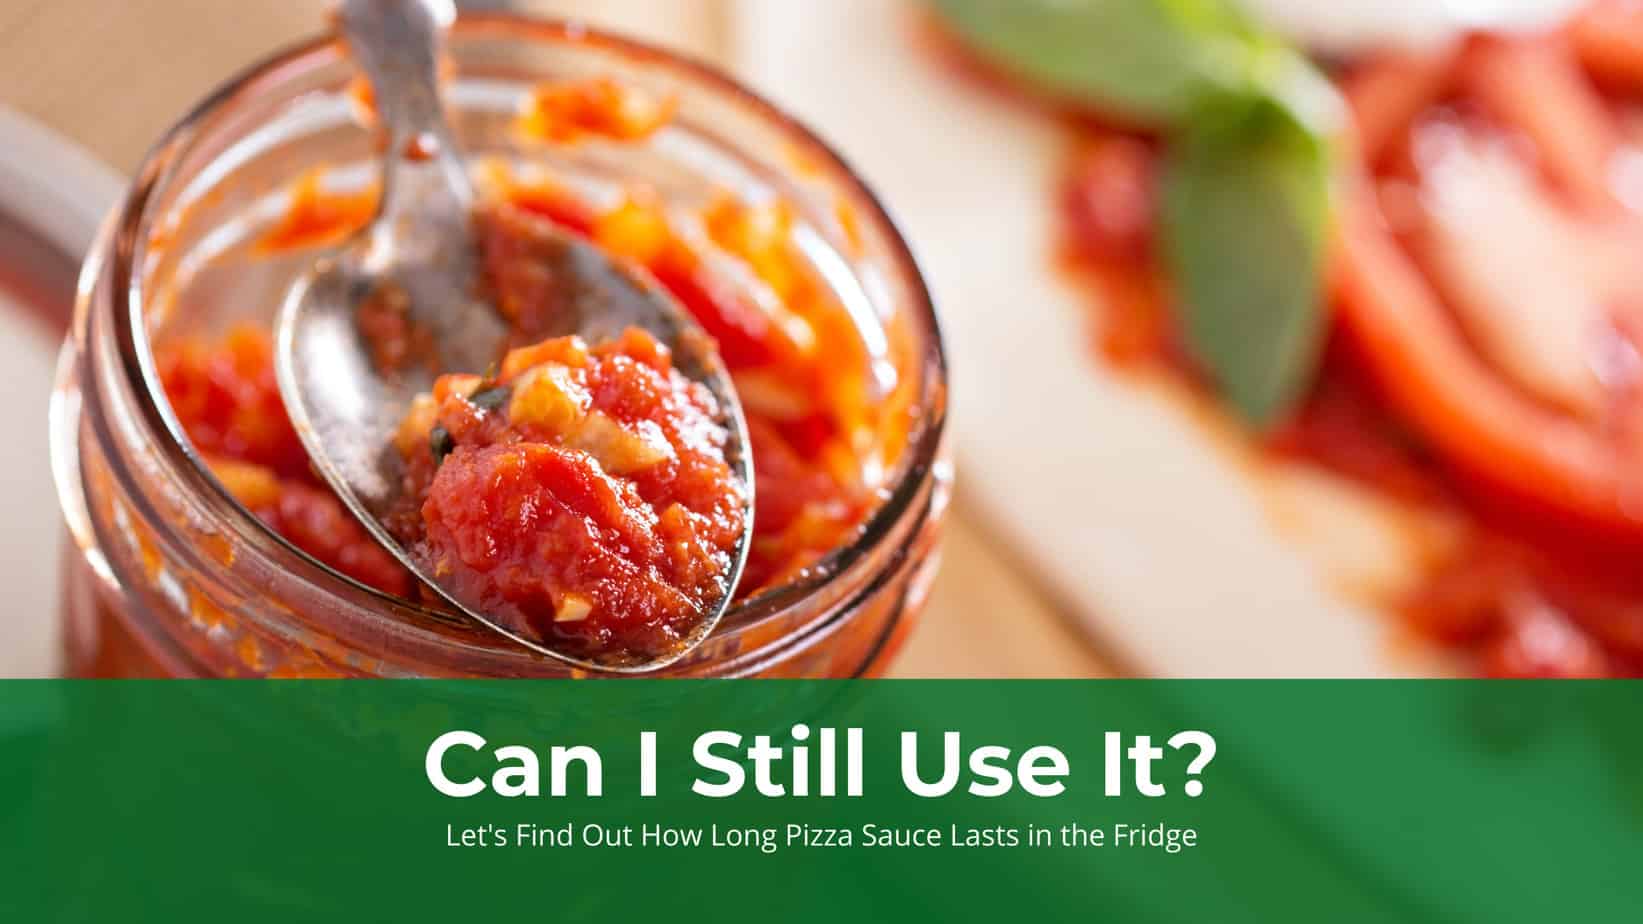 How Long Pizza Sauce Lasts in the Fridge